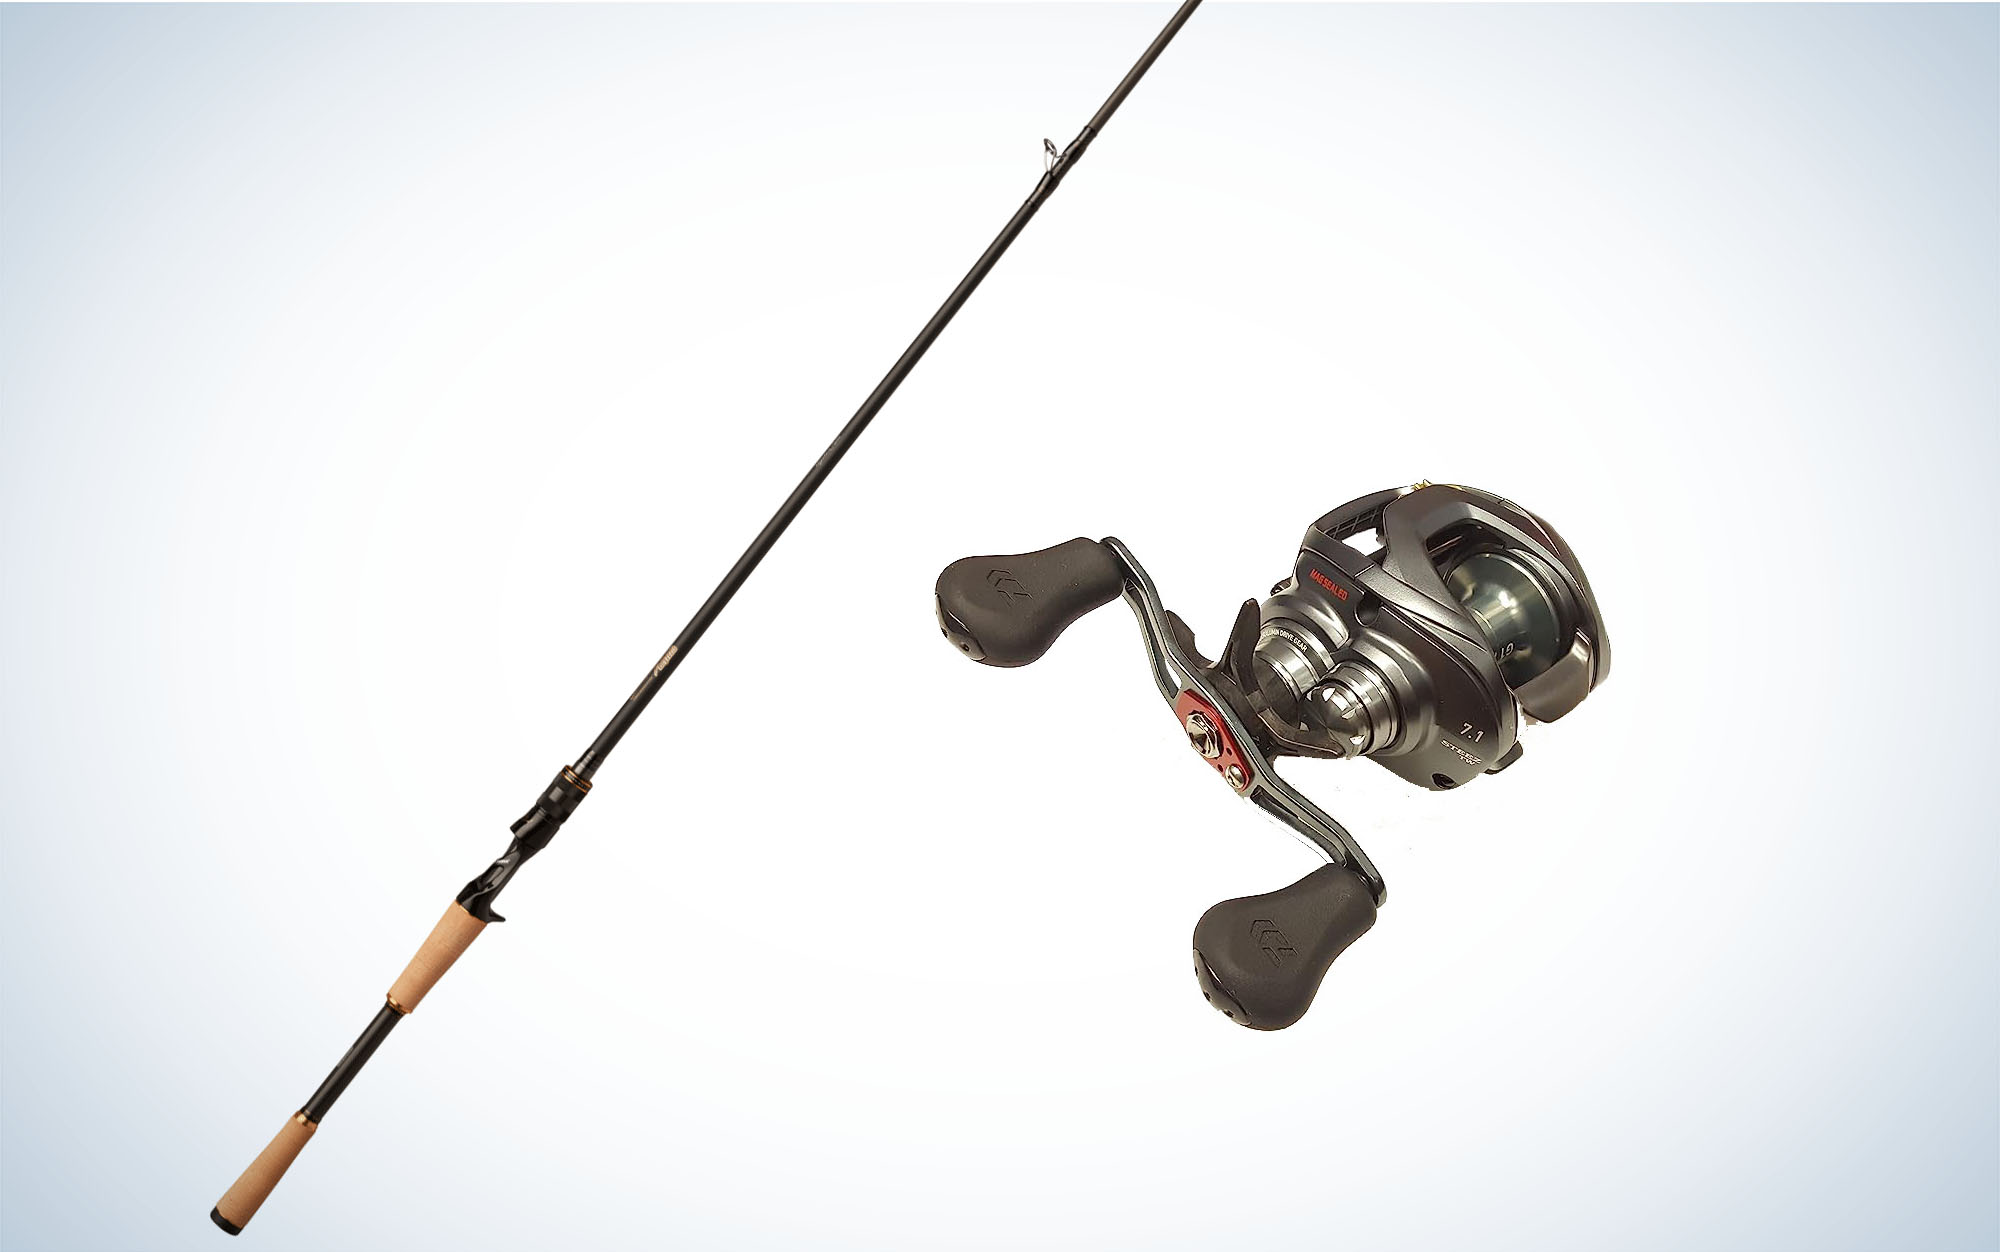 We tested the Megabass FMJ and Daiwa Steez A.